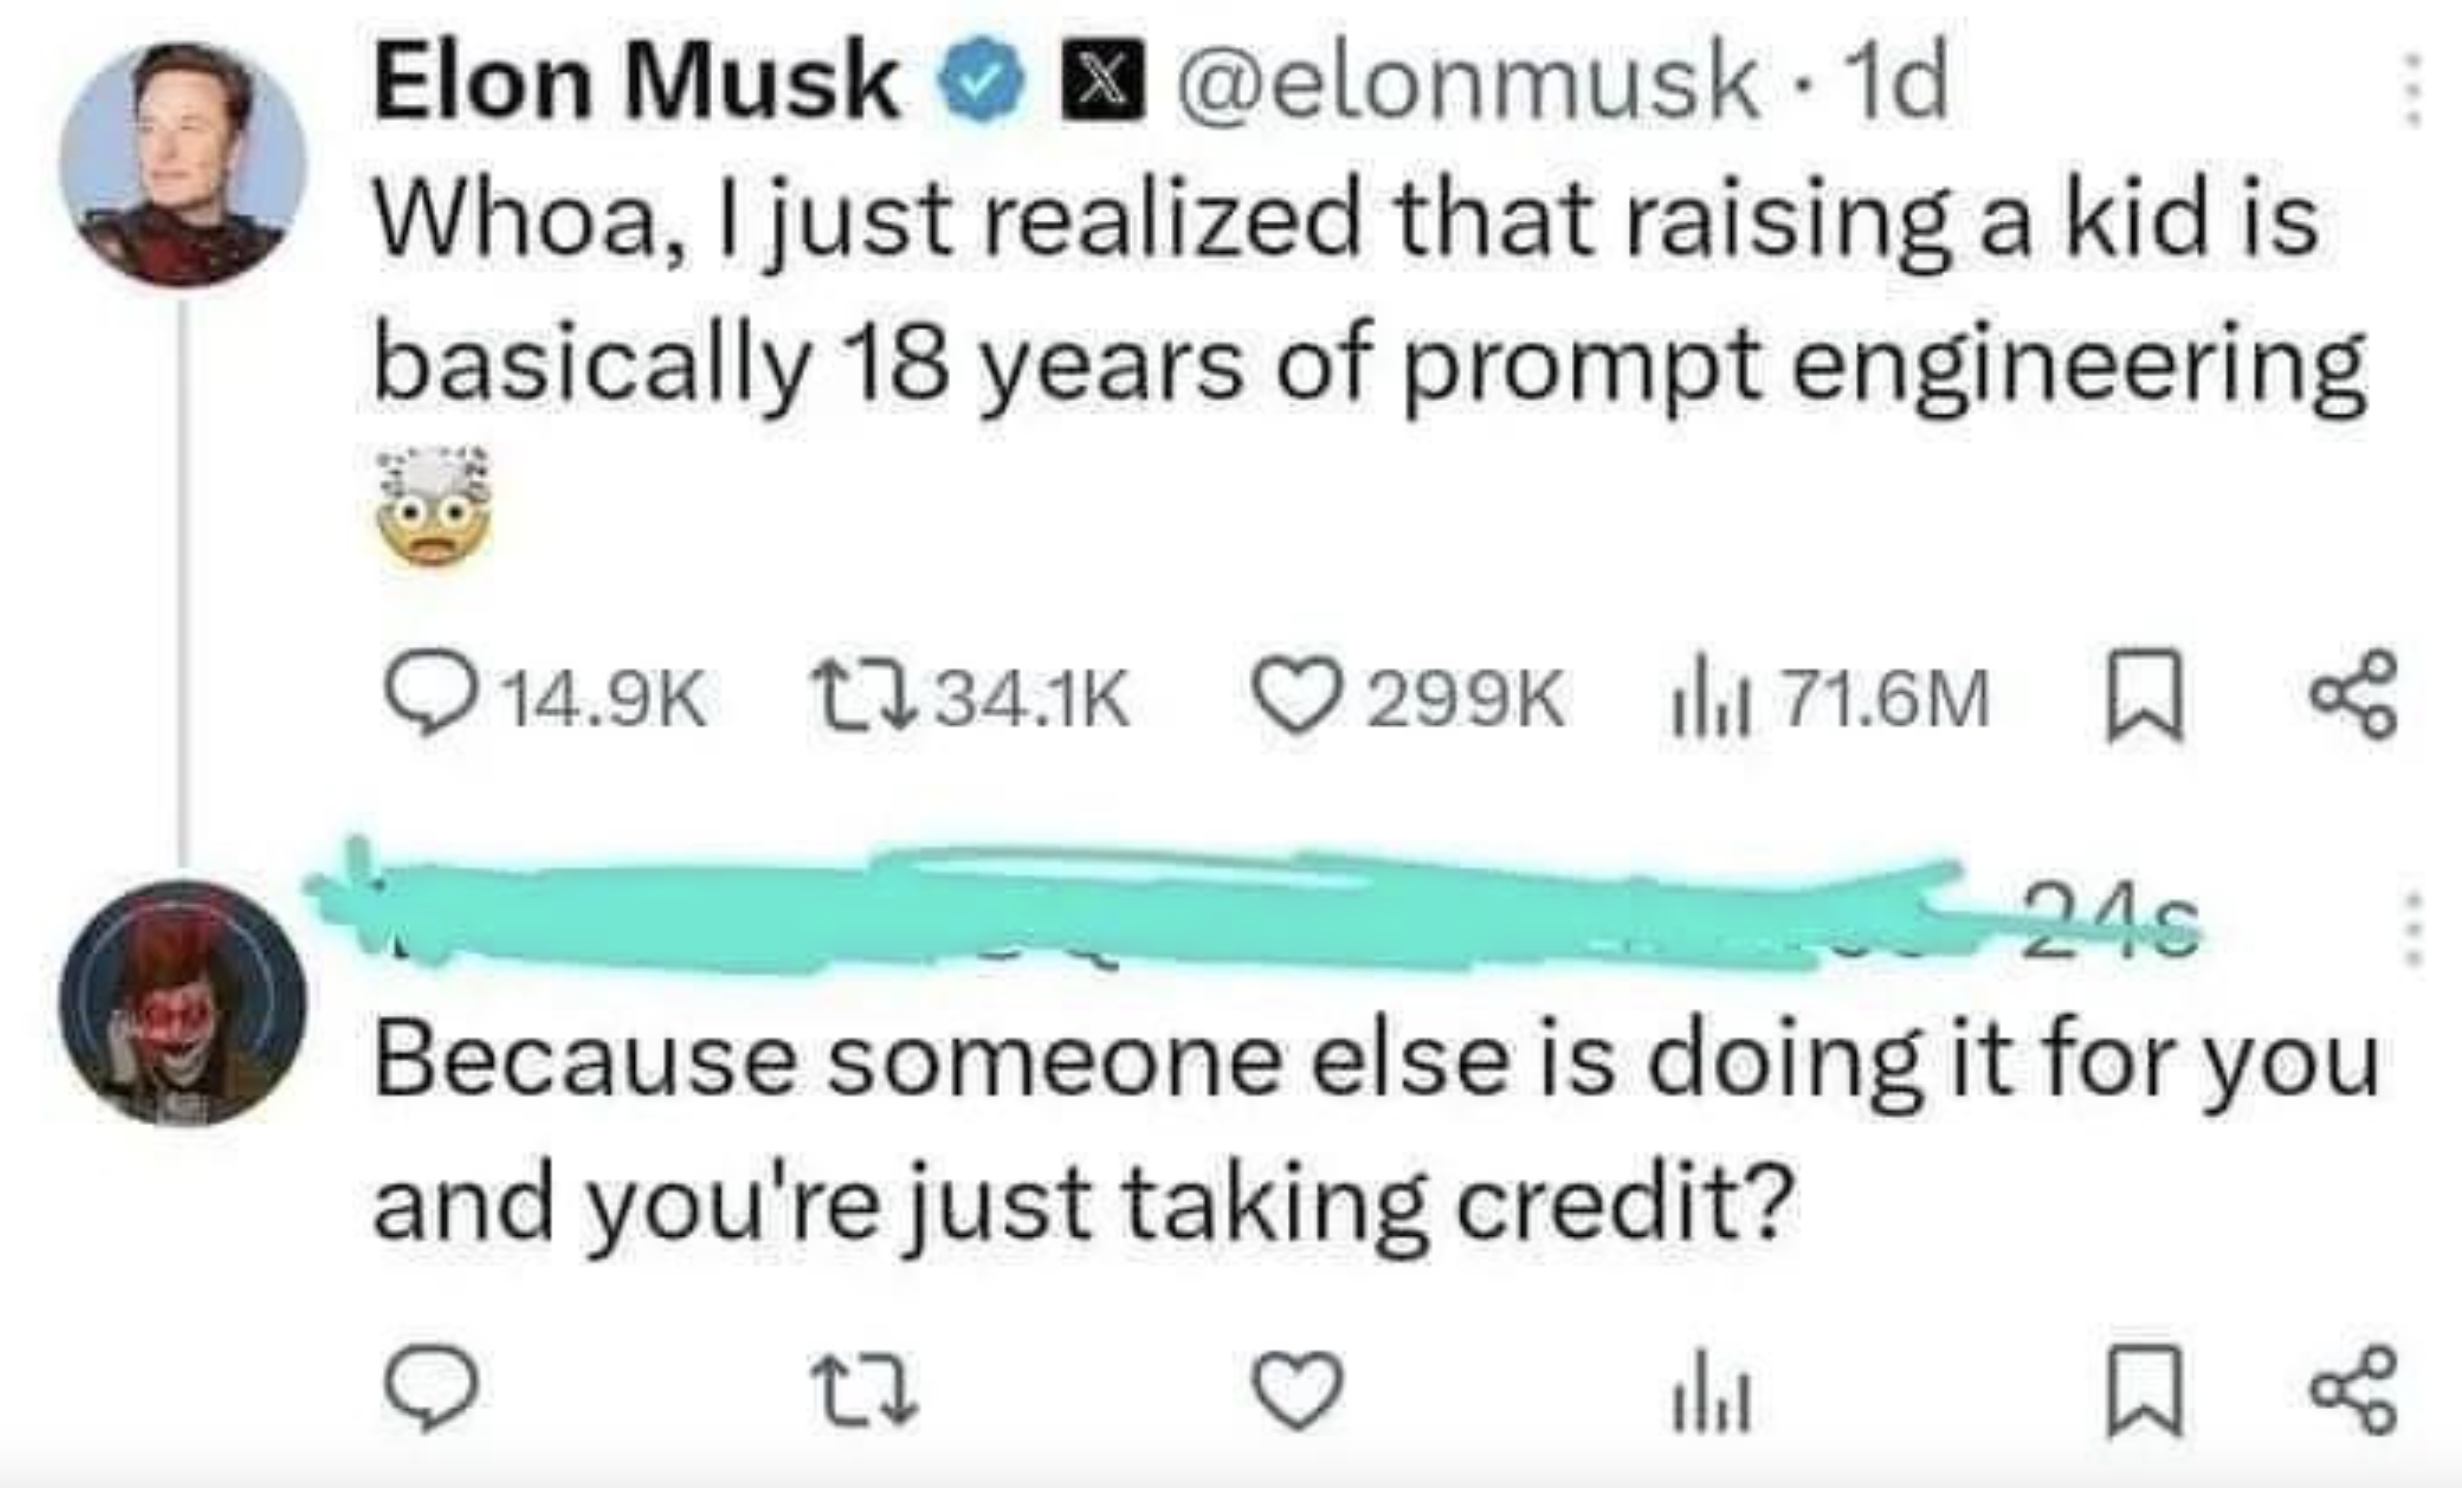 Elon Musk . 1d Whoa, I just realized that raising a kid is basically 18 years of prompt engineering 71.6M 24s Because someone else is doing it for you and you're just taking credit? 27